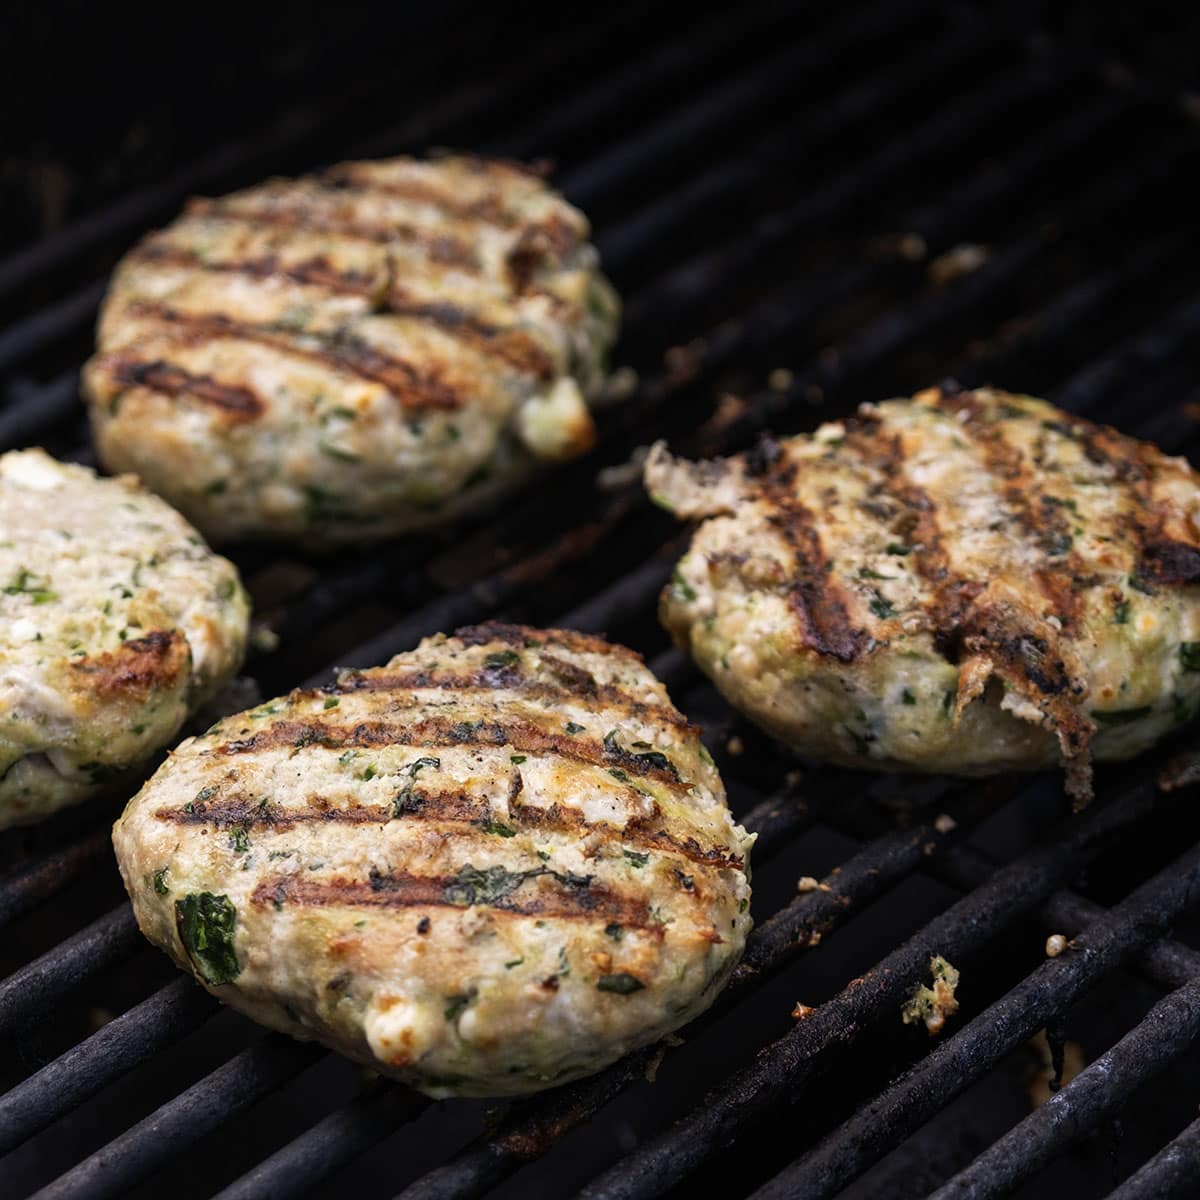 Chicken patties on the grill flipped over with grill marks.